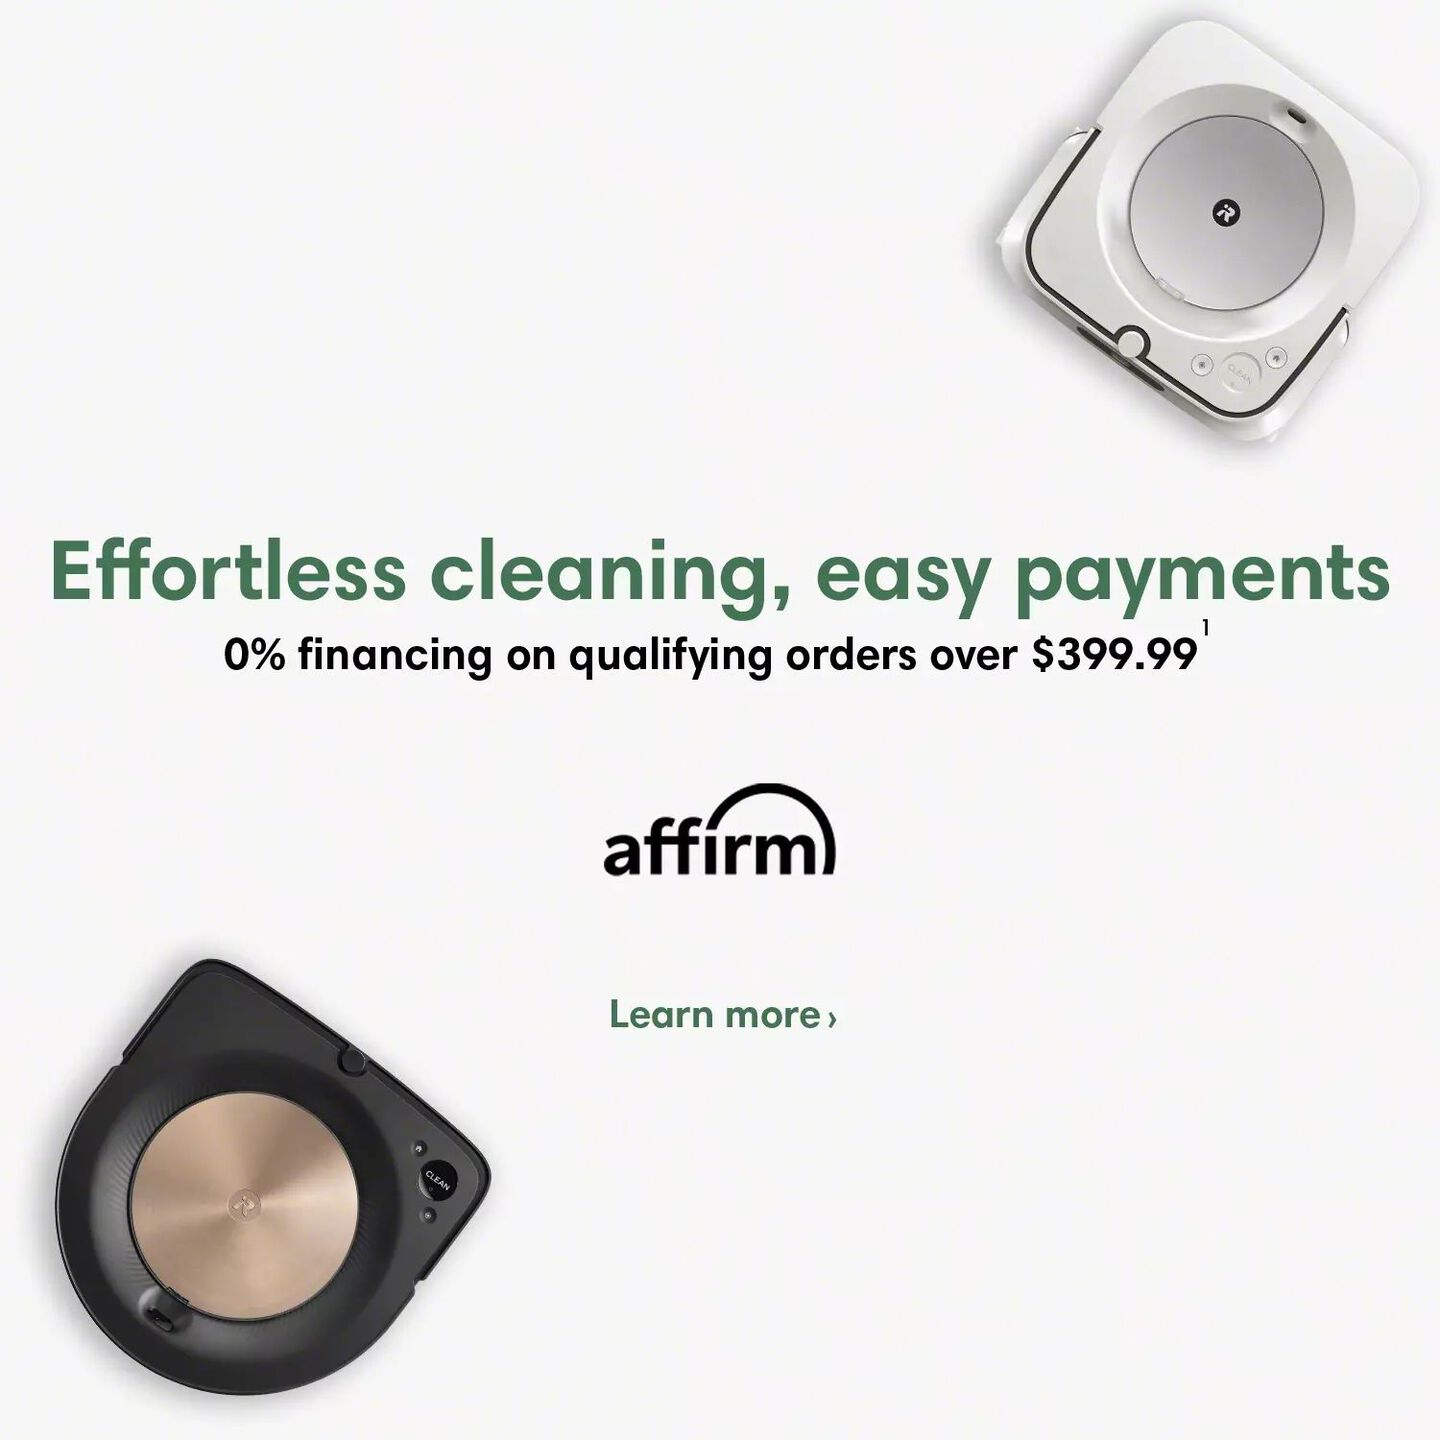 iRobot Affirm | Effortless cleaning, easy payments